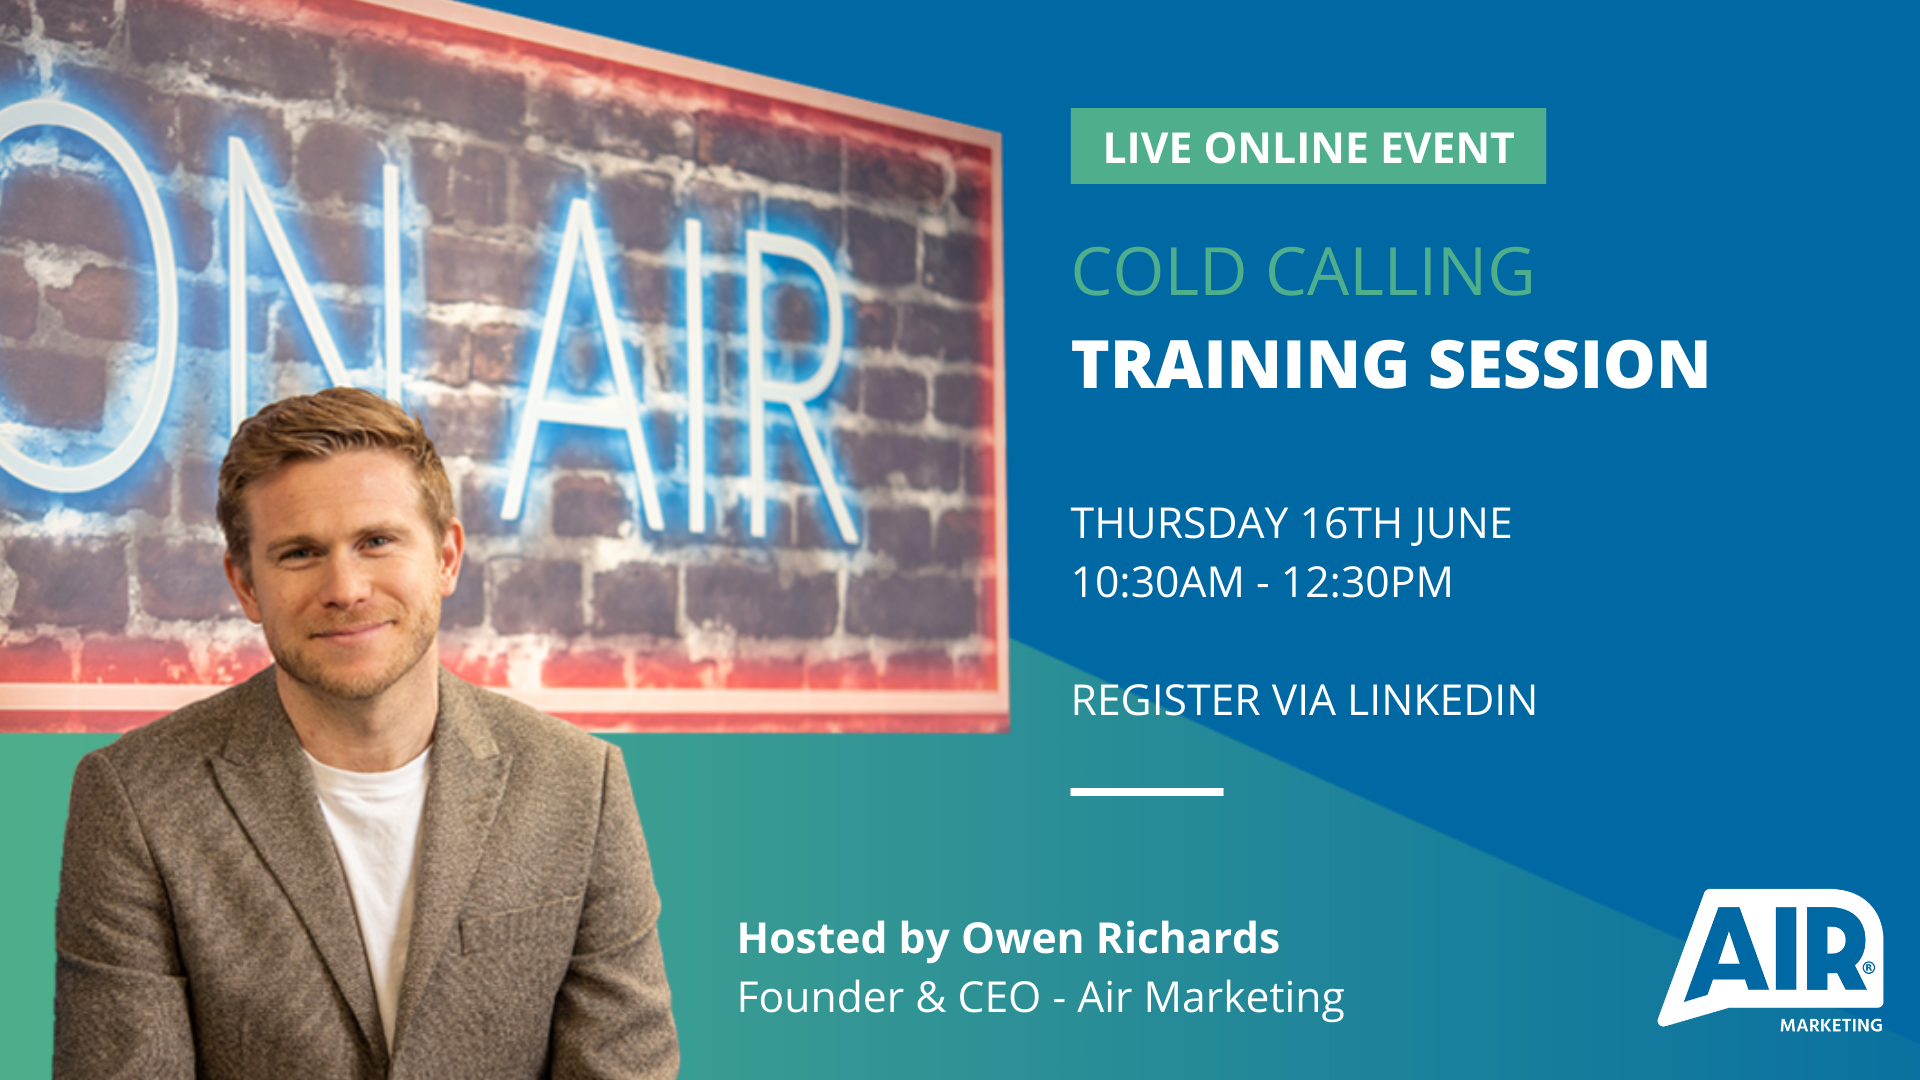 LIVE Event: Cold Calling Training Session for SDRs, BDRs & Telesales Executives